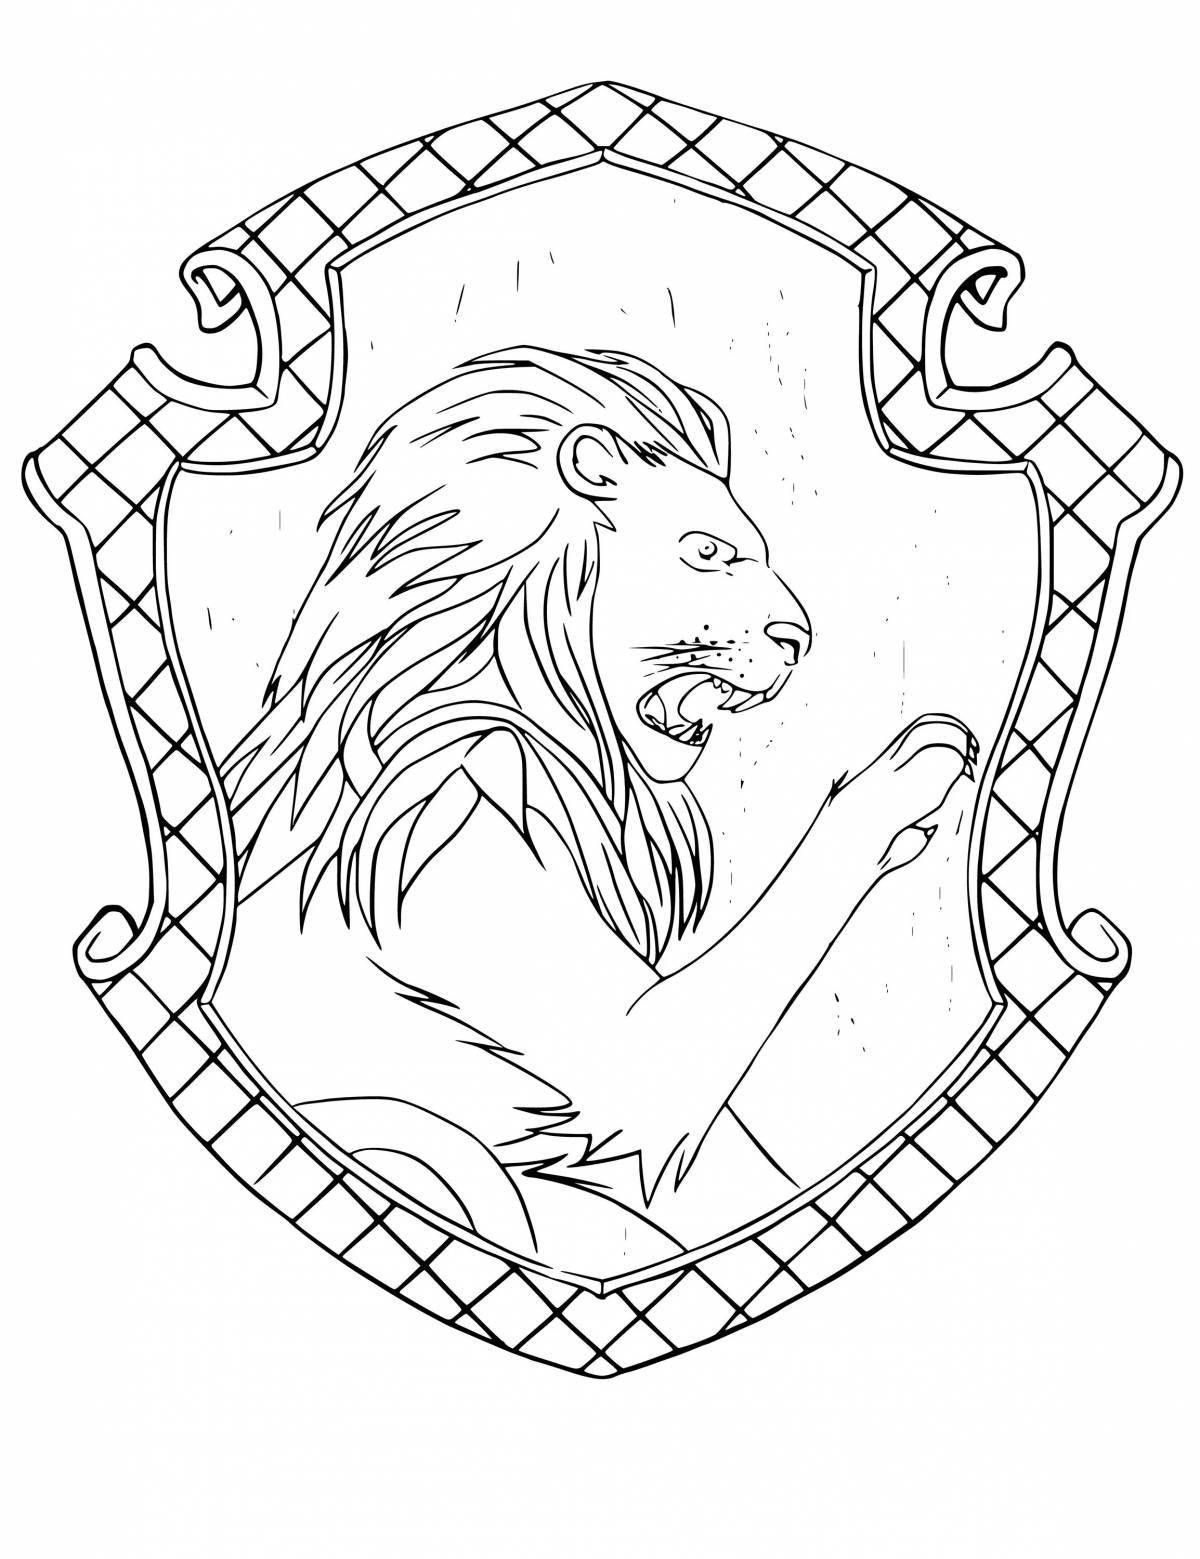 Colorful gryffindor coloring page